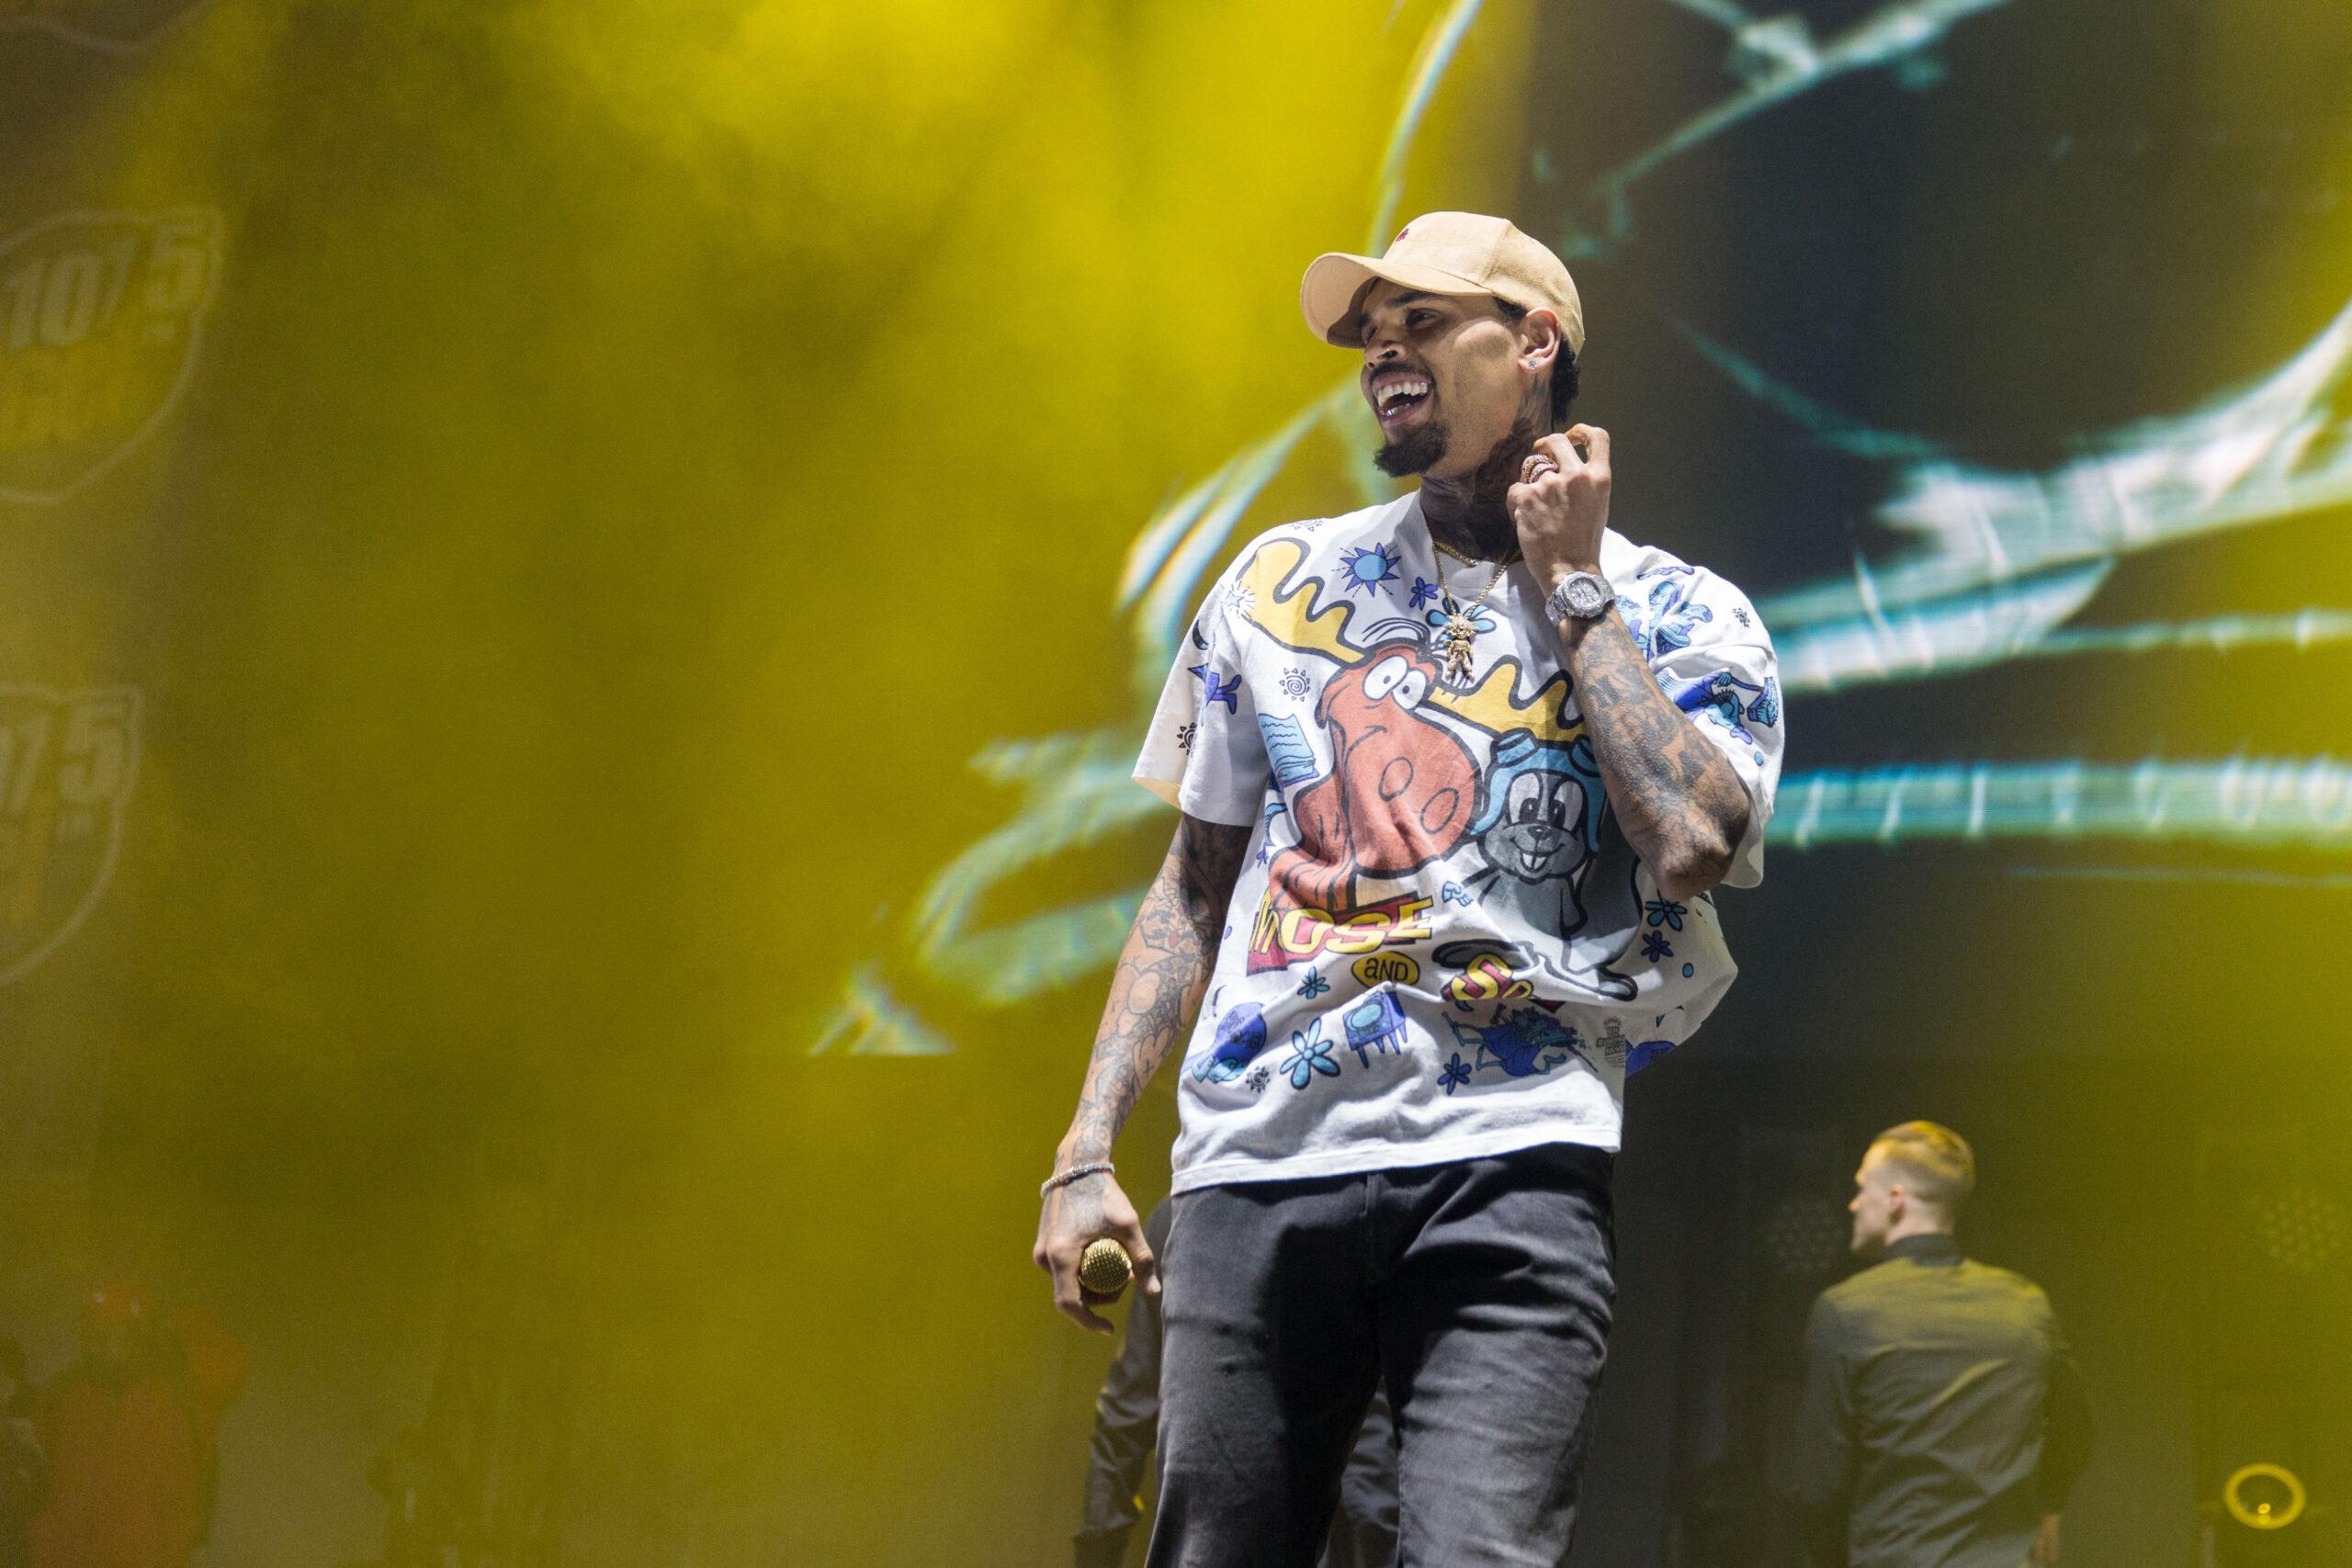 Chris Brown performing at the WGCI Big Jam Concert in Chicago